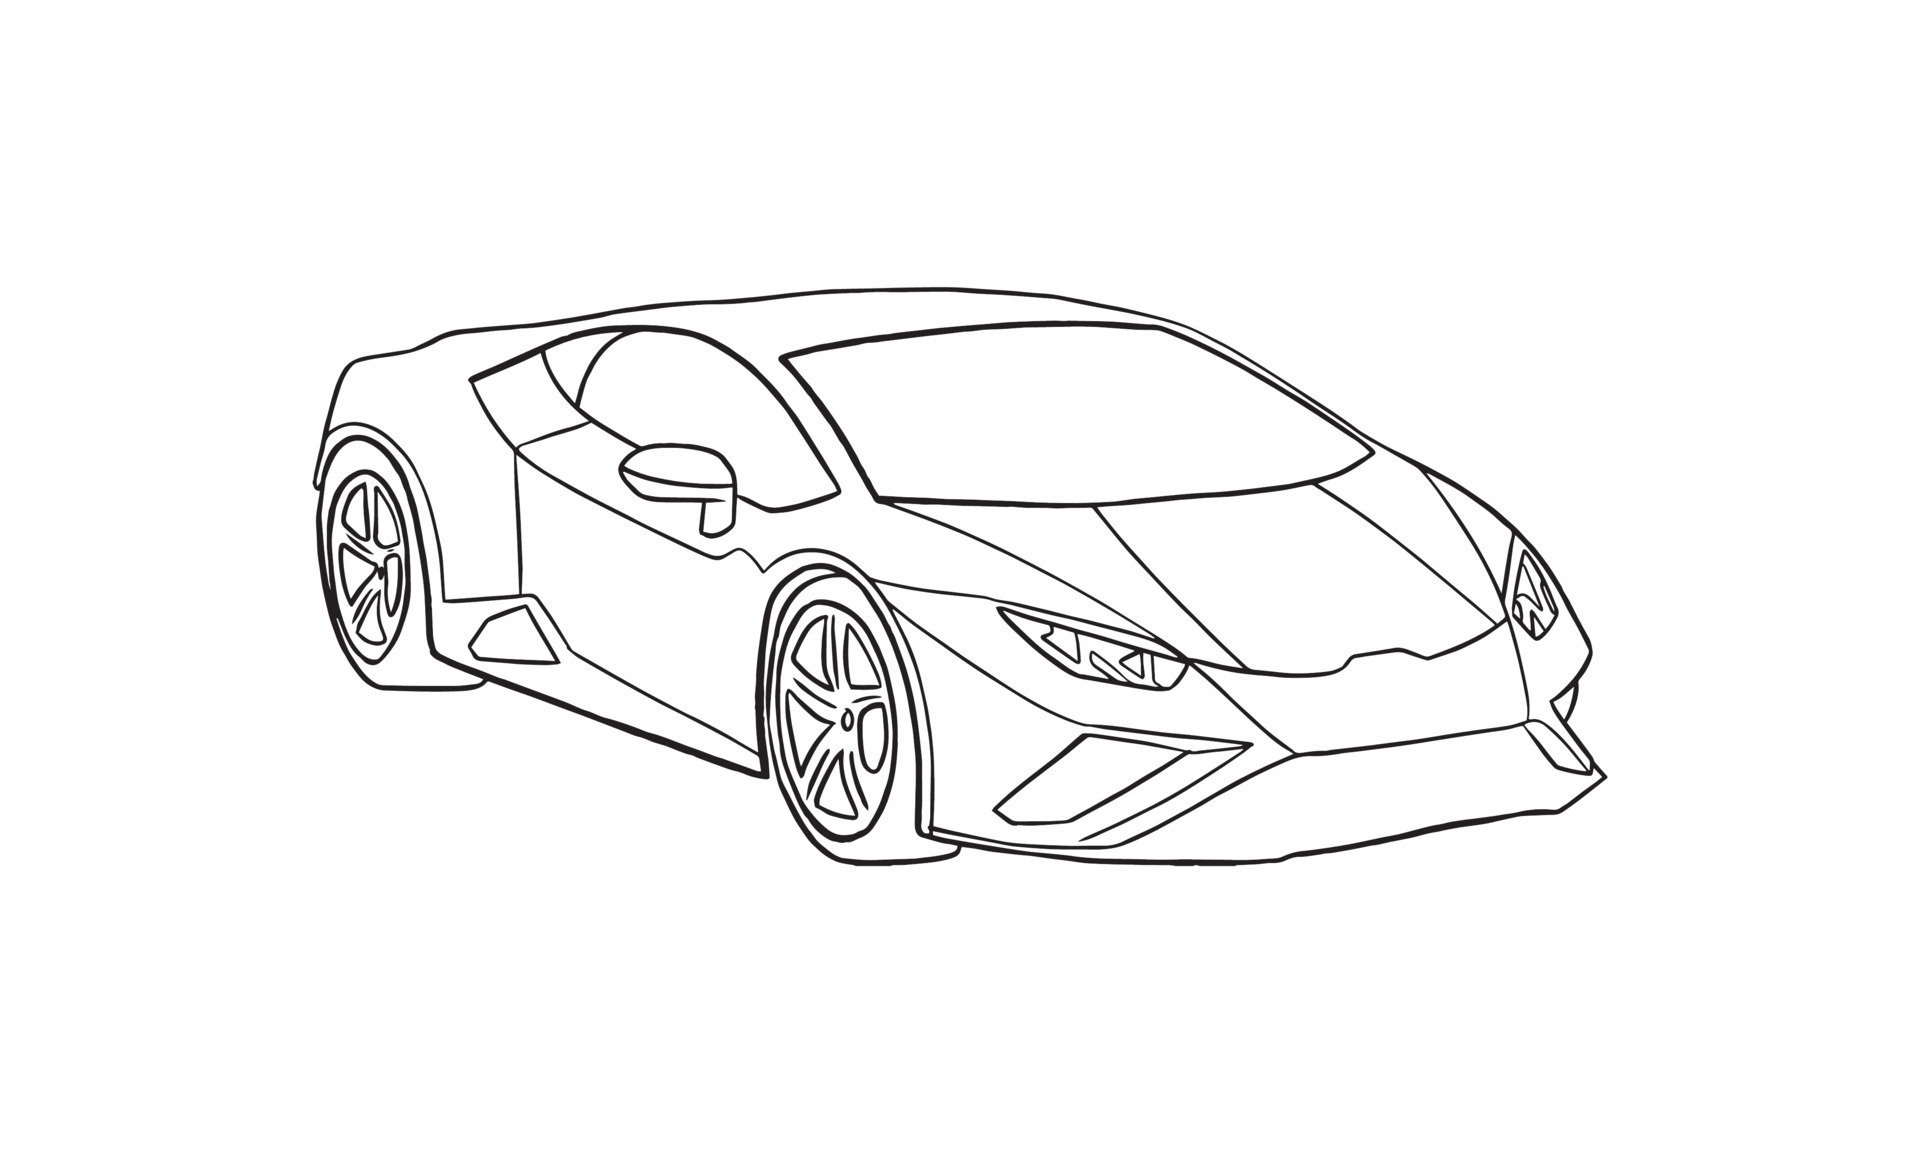 How to Sketch, Draw, Design Cars Like a Pro in 3D (Pen & Paper Edition) |  Kai F. | Skillshare